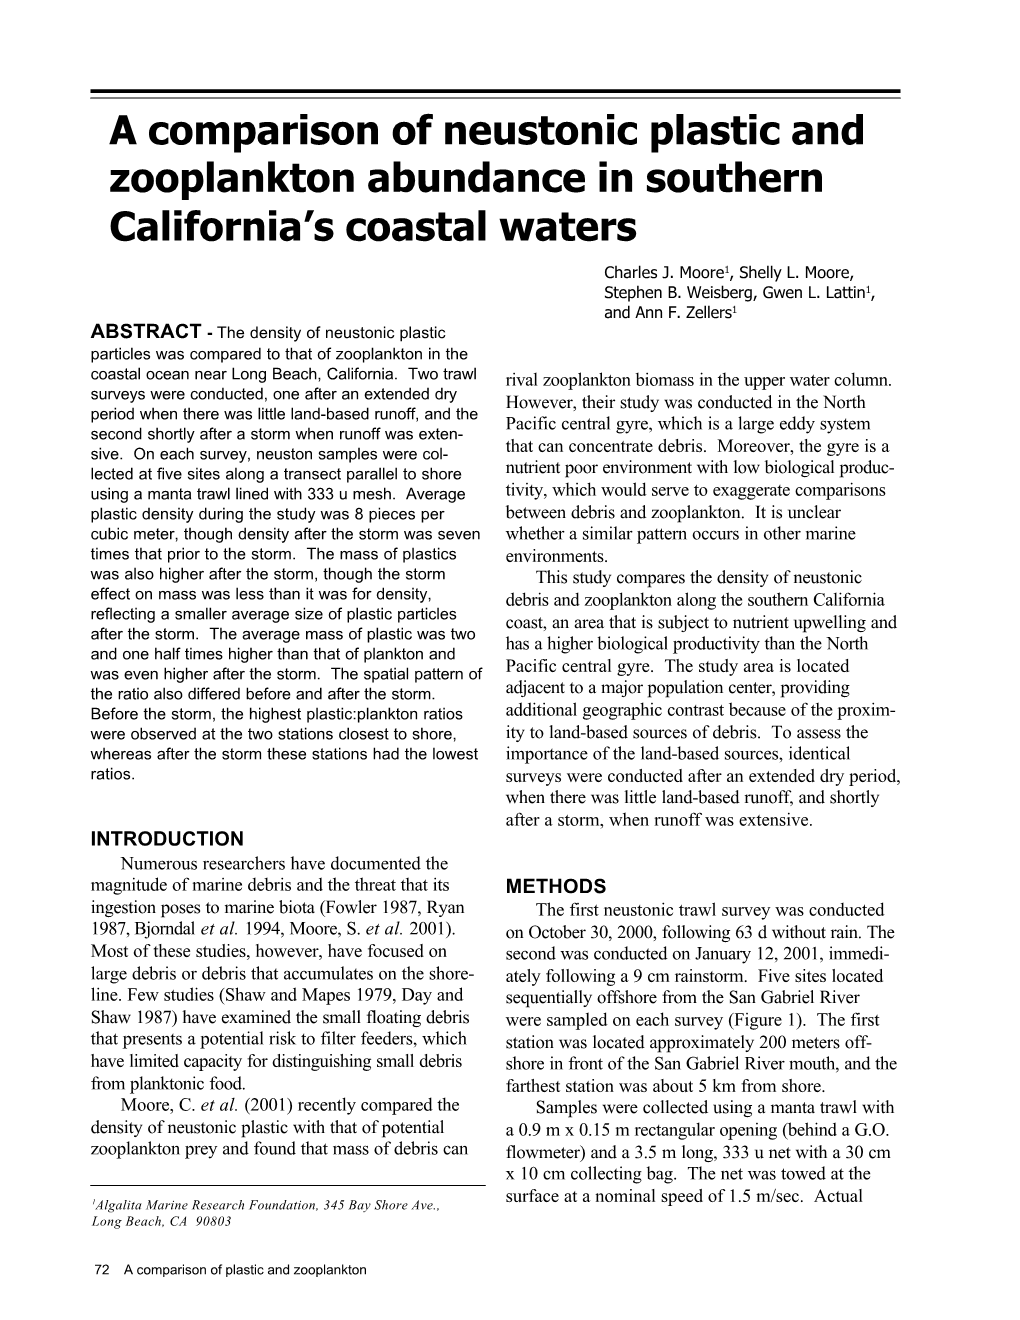 A Comparison of Neustonic Plastic and Zooplankton Abundance in Southern California’S Coastal Waters